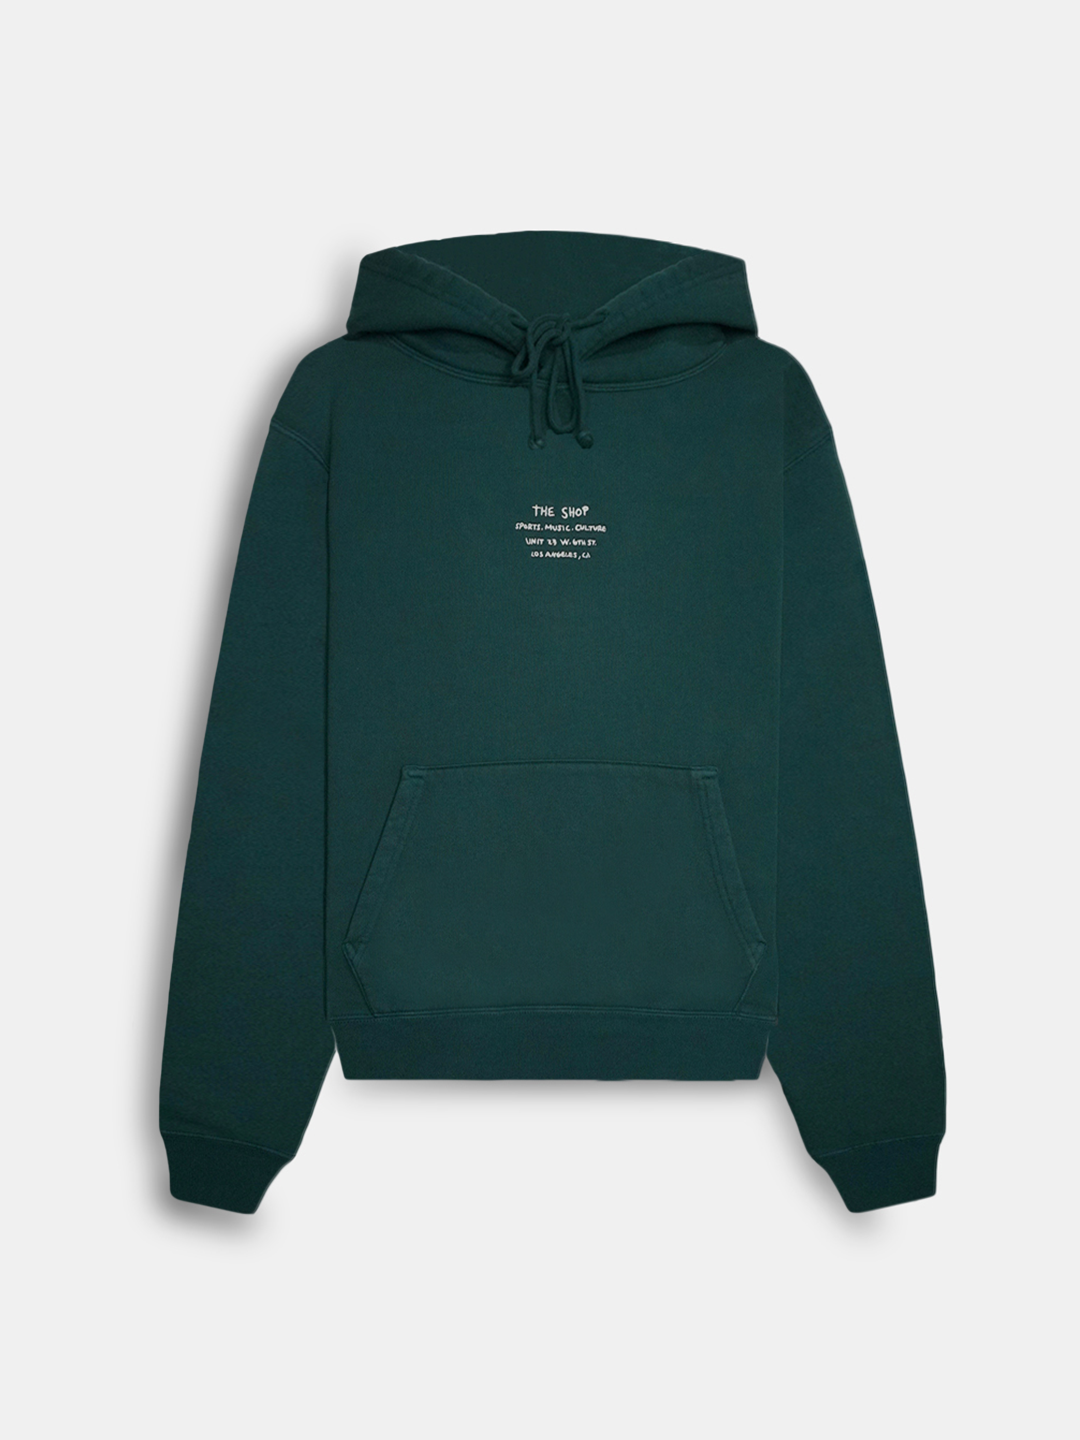 The Shop By Hand Fleece Hoodie Forest Green - Front